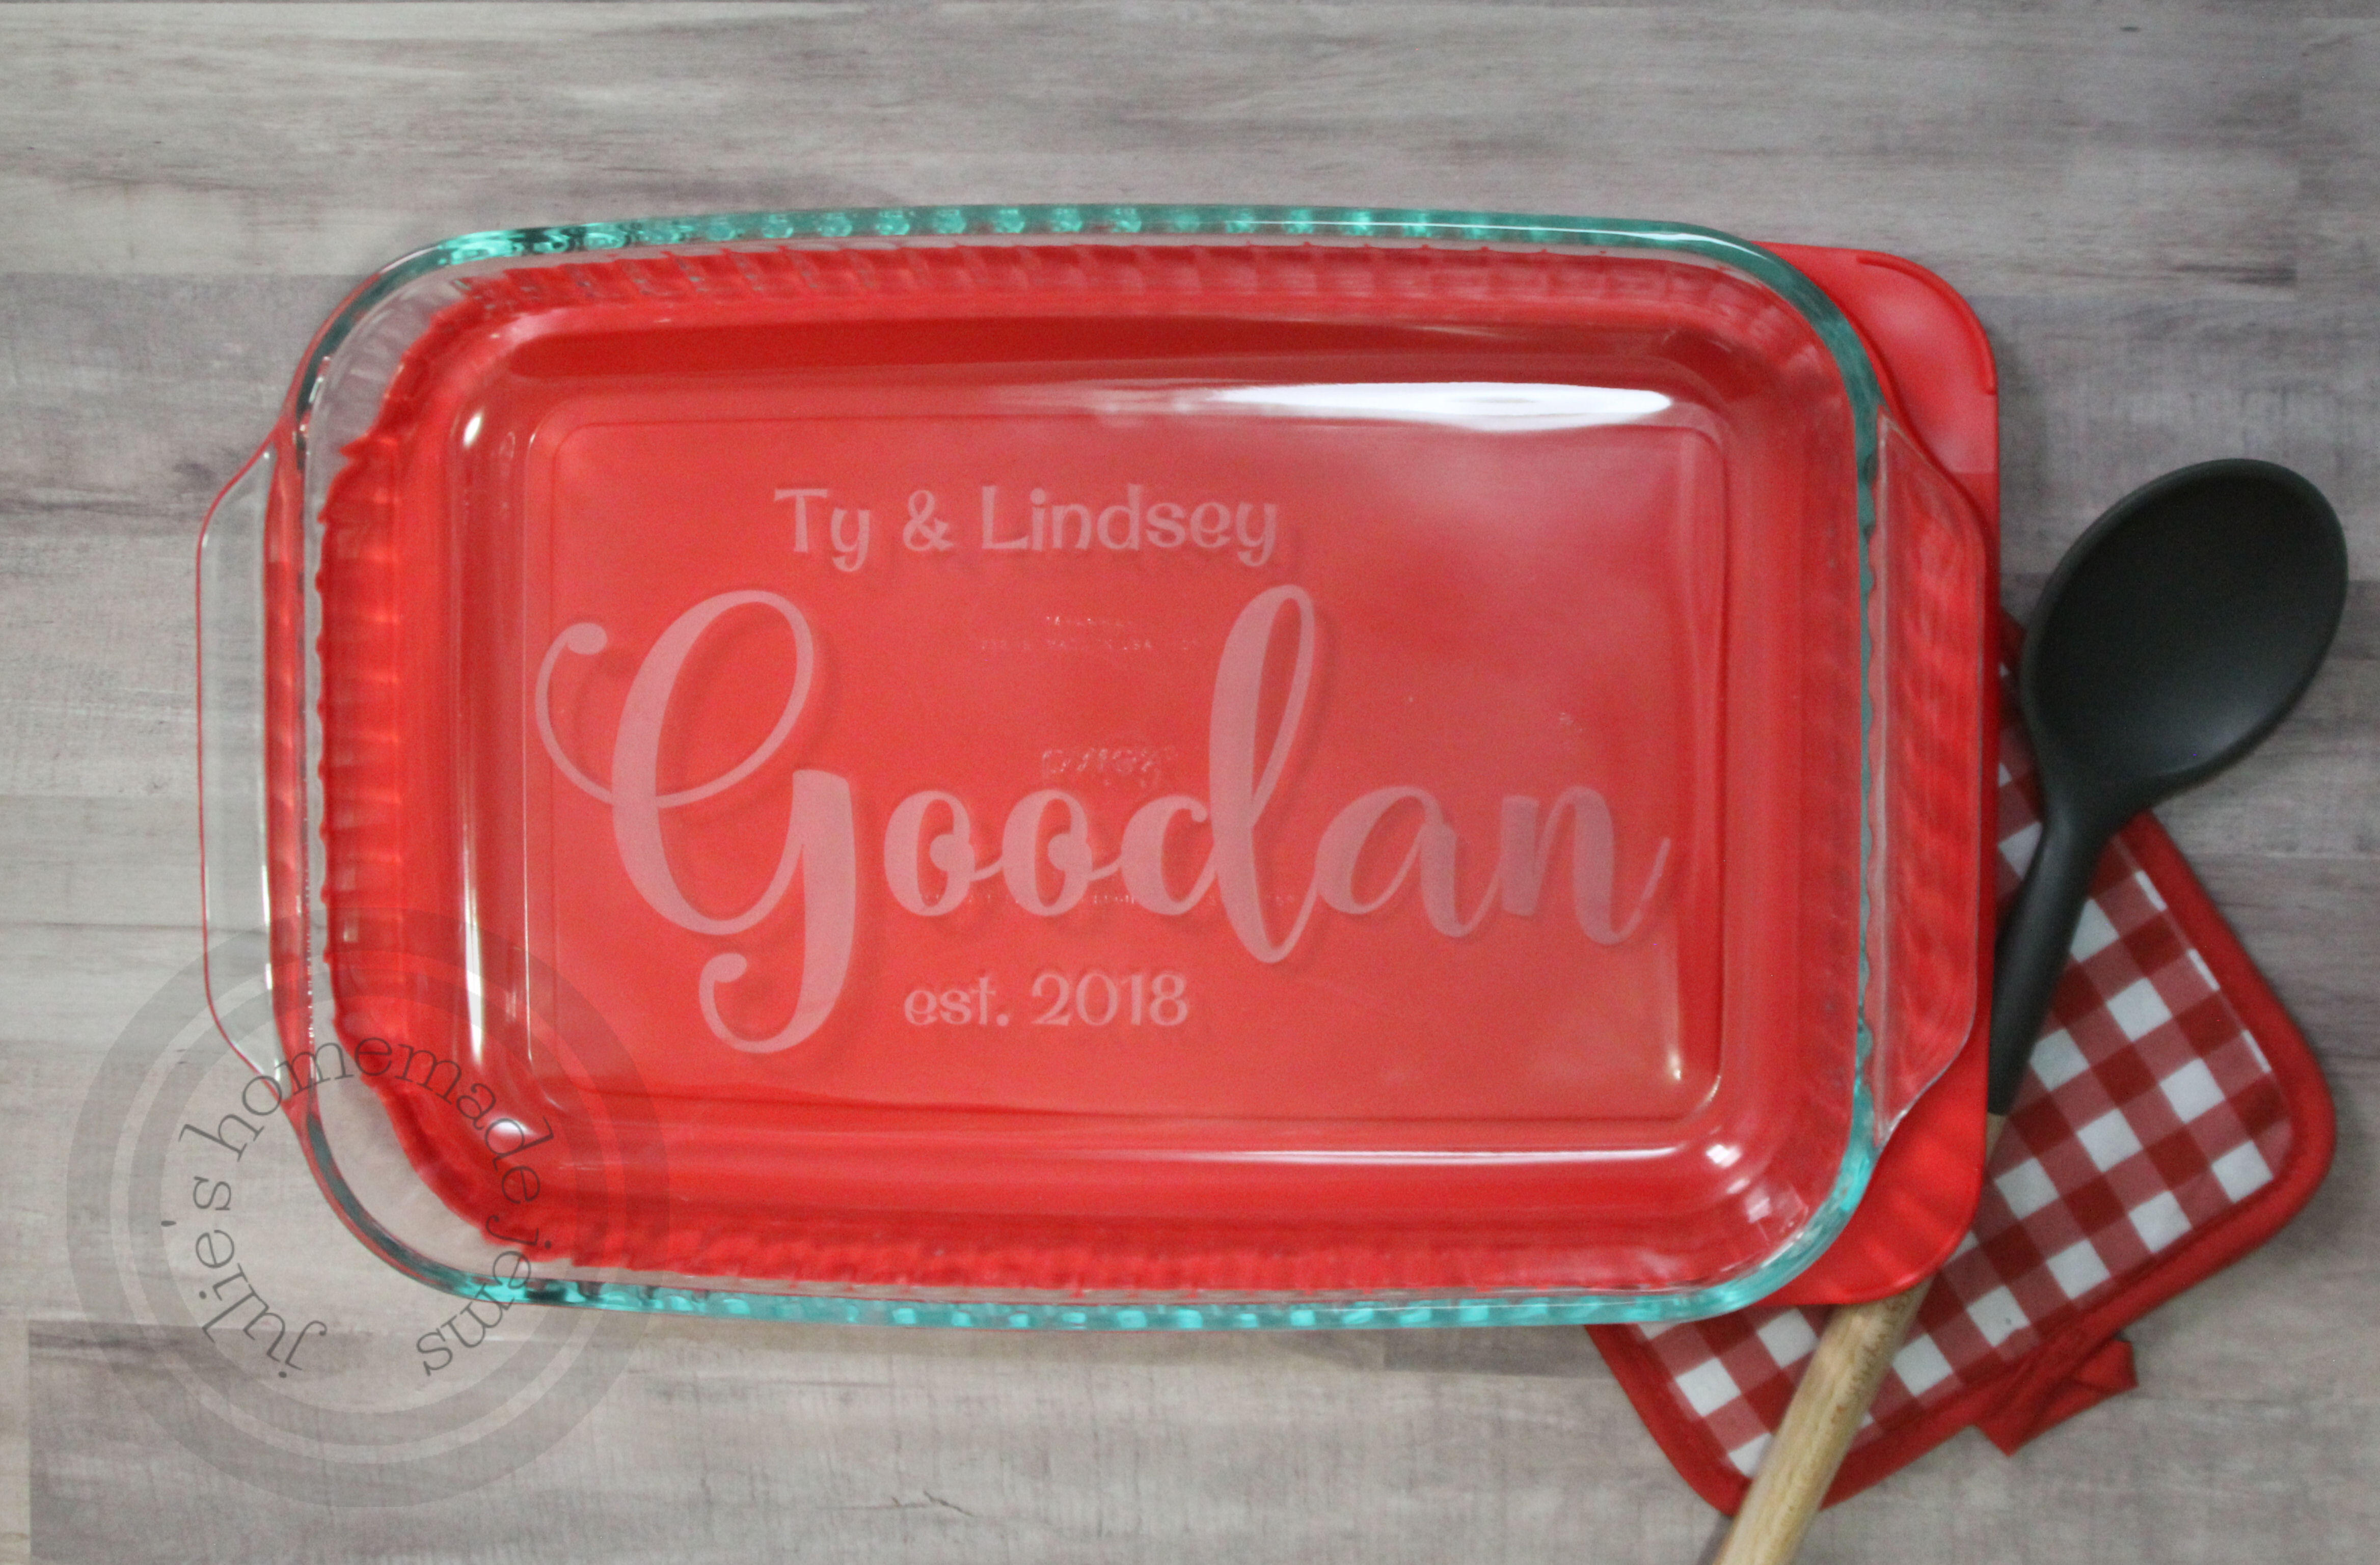 Personalized Engraved Pyrex Baking Dish, Etched Casserole Pan, Custom Glass  Bakeware With Lid, Wedding, Mothers Day Present, Mom Gift, Cake 